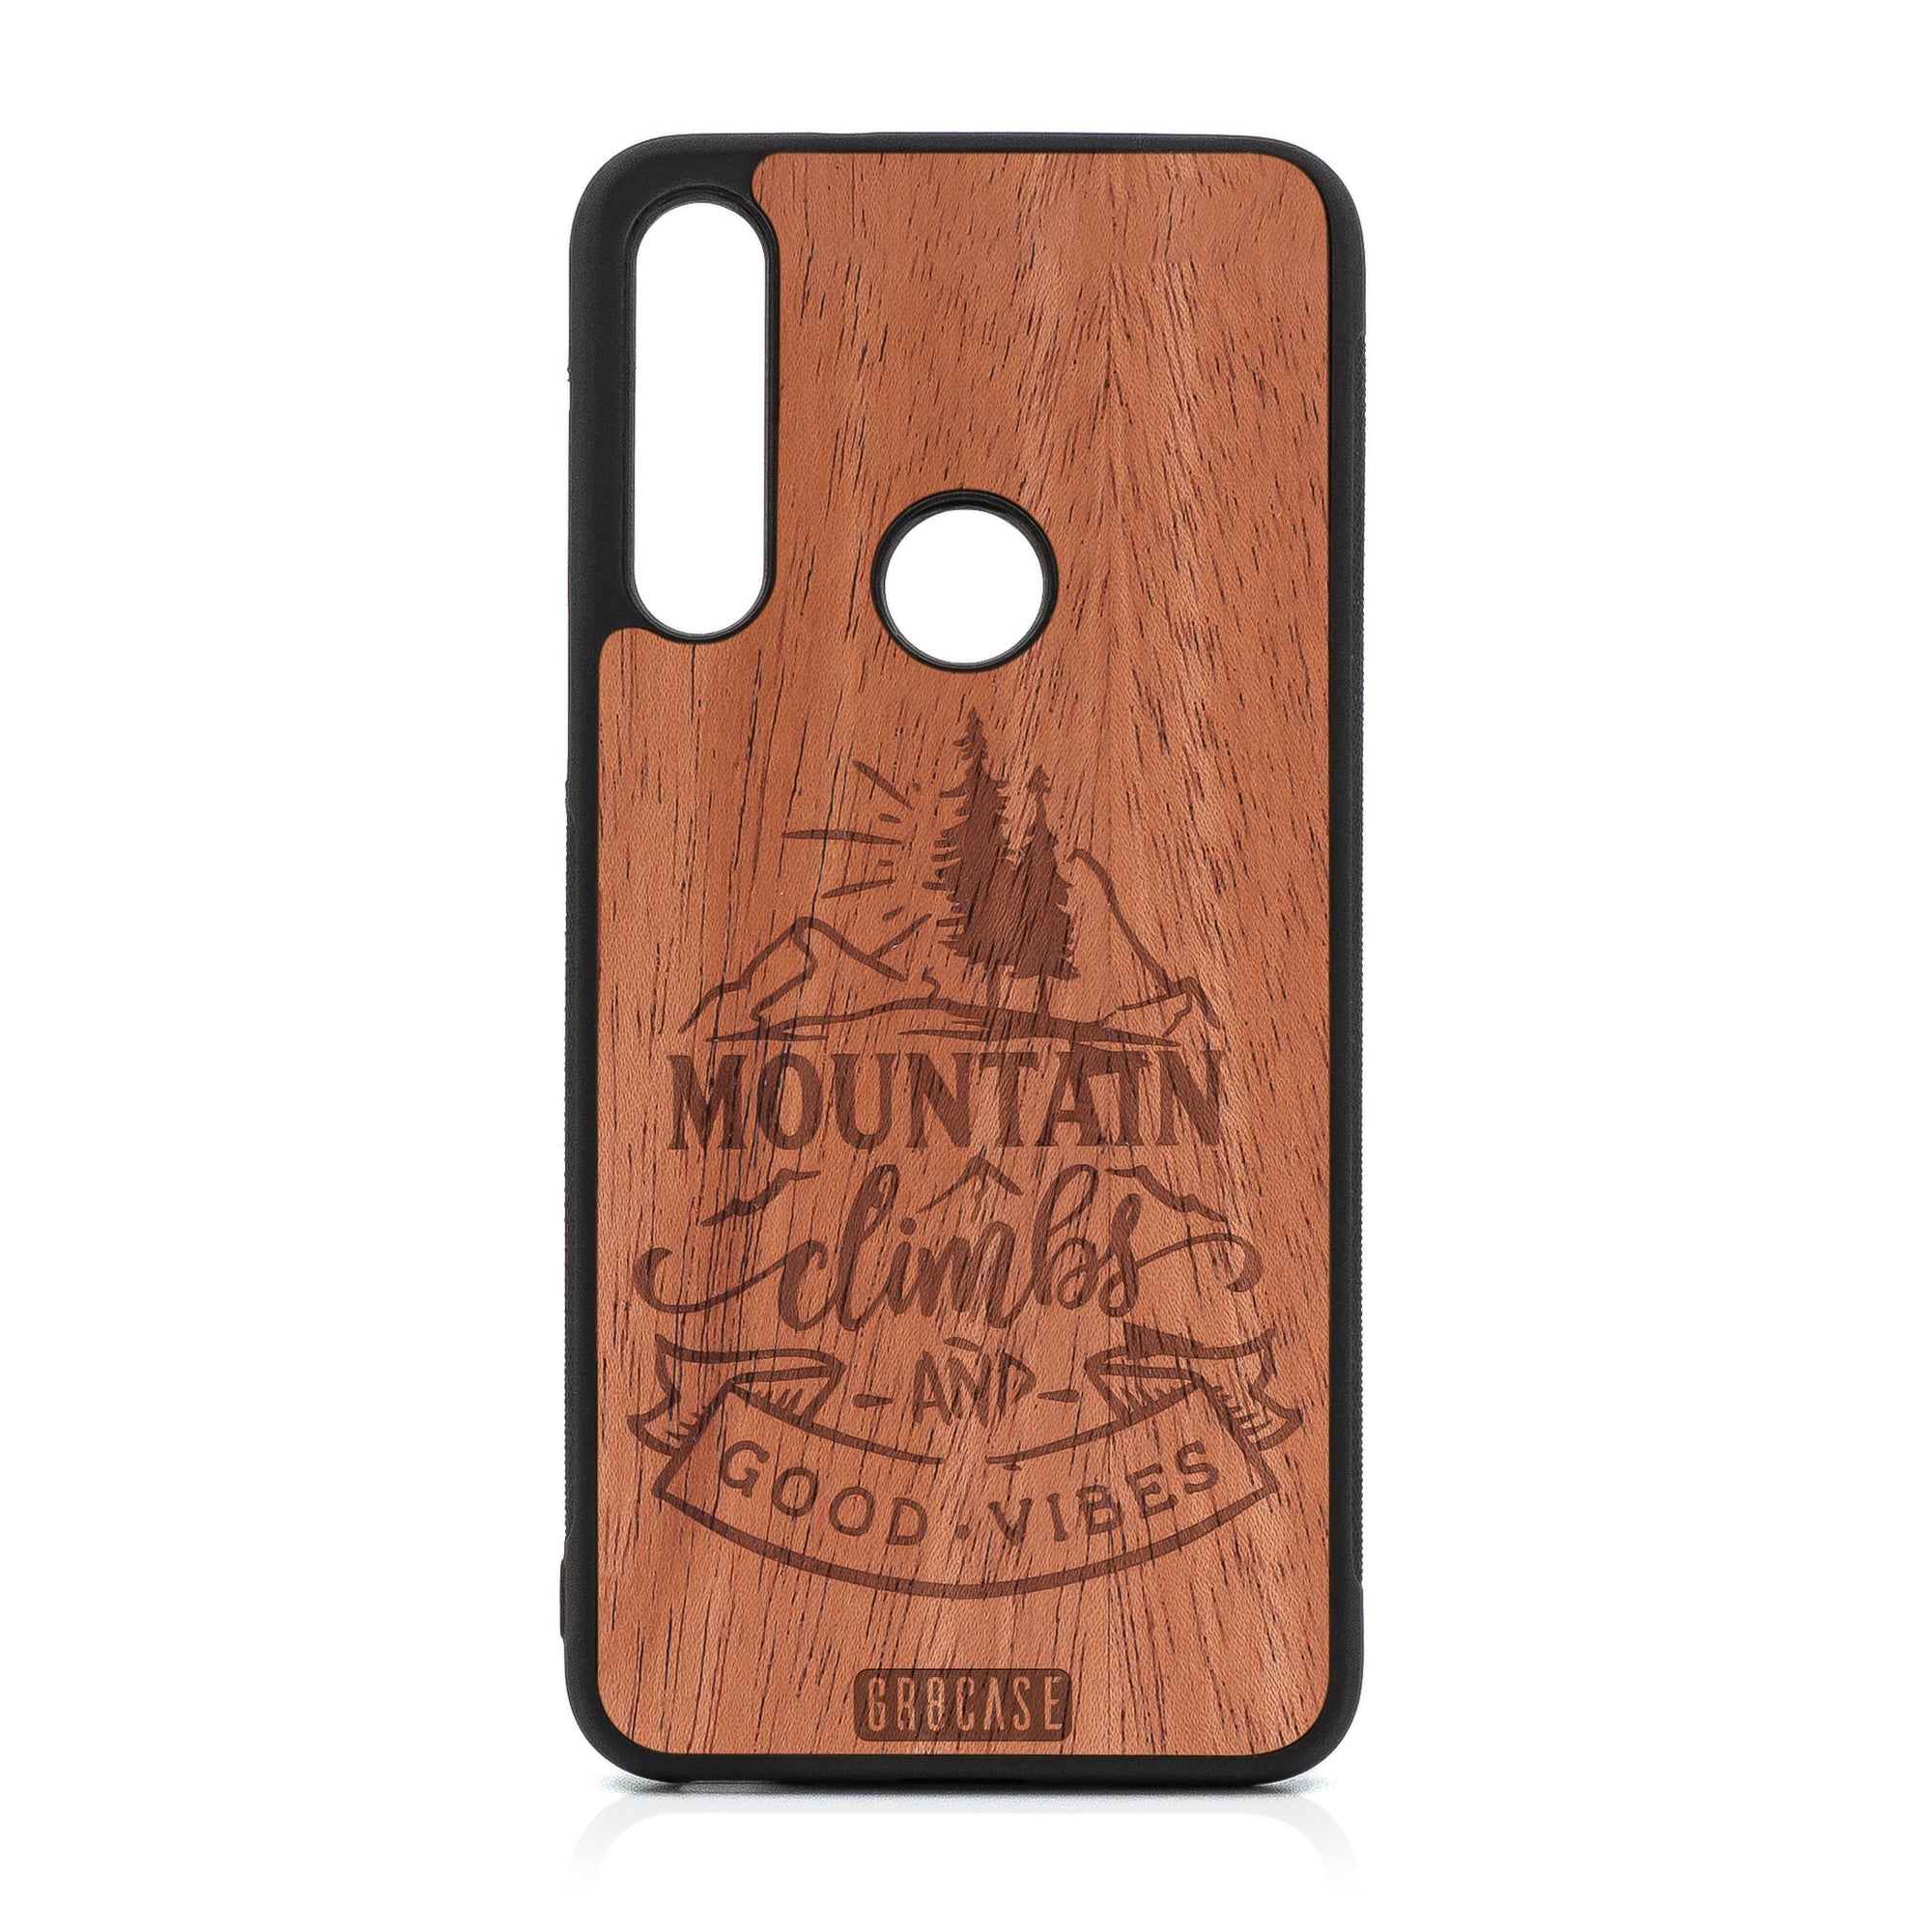 Mountain Climbs And Good Vibes Design Wood Case For Moto G Fast